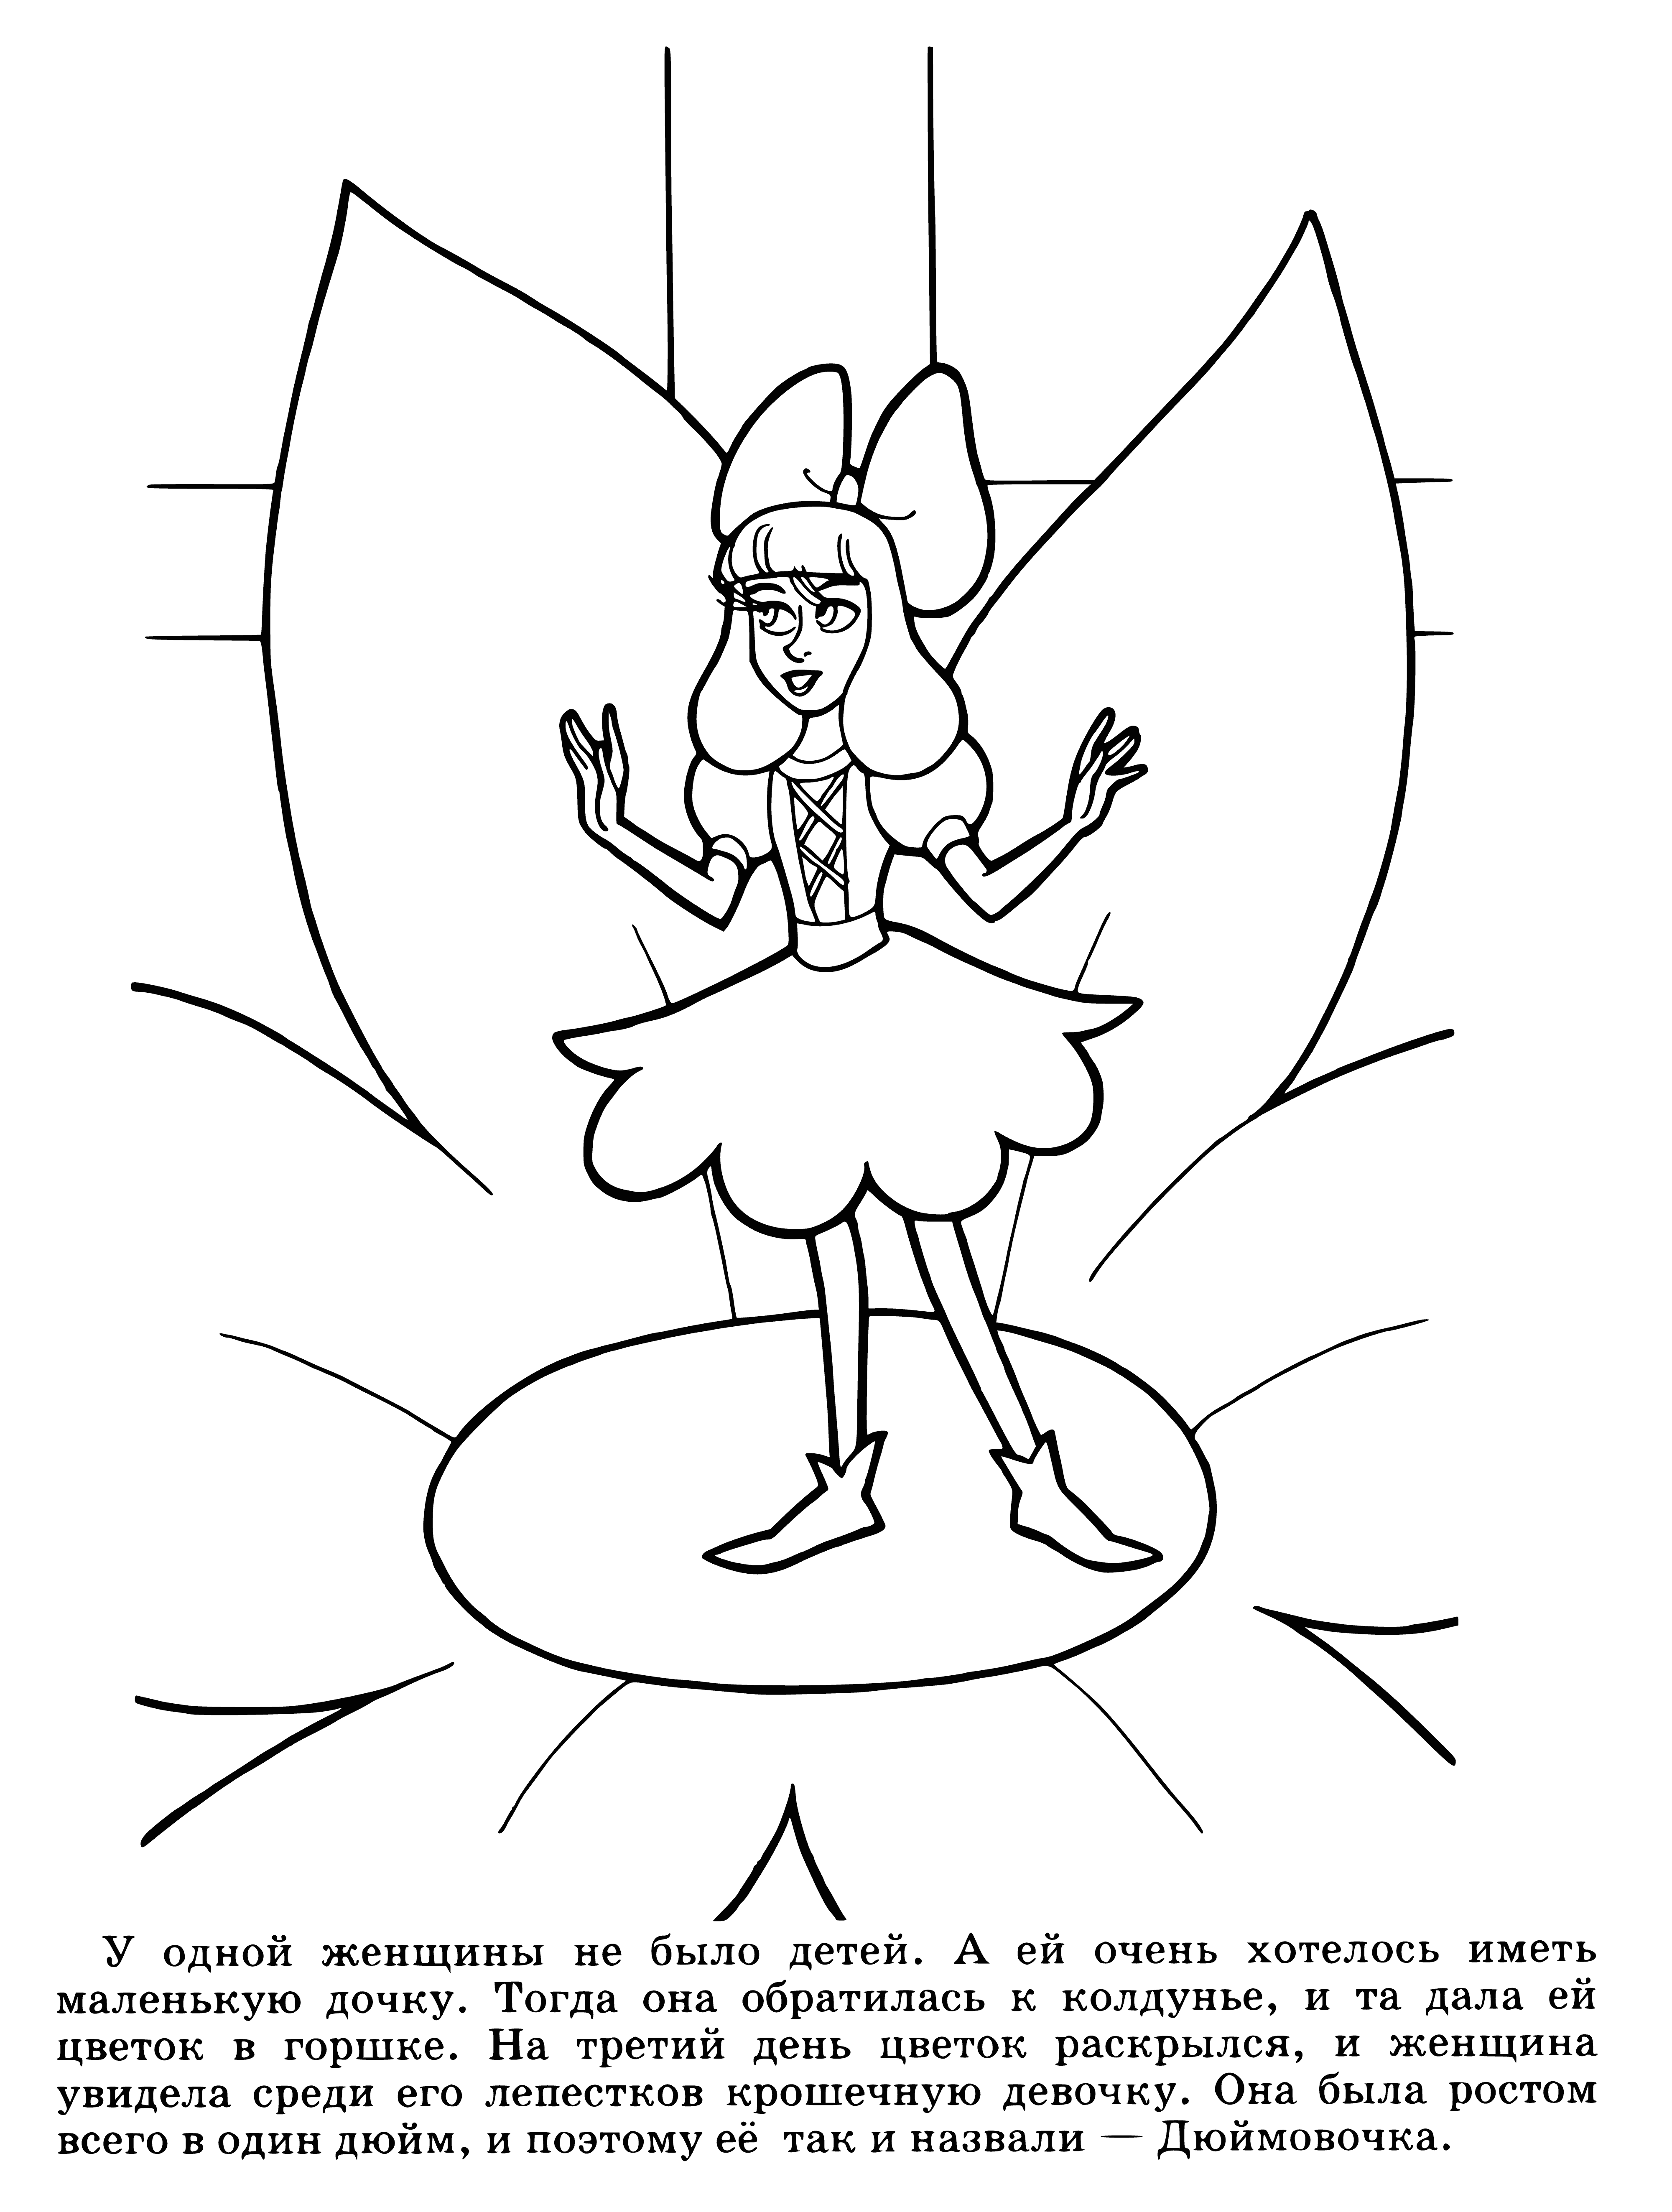 coloring page: Girl with blonde hair, blue eyes, wearing white dress w/ red ribbon & wings on back holds a flower.